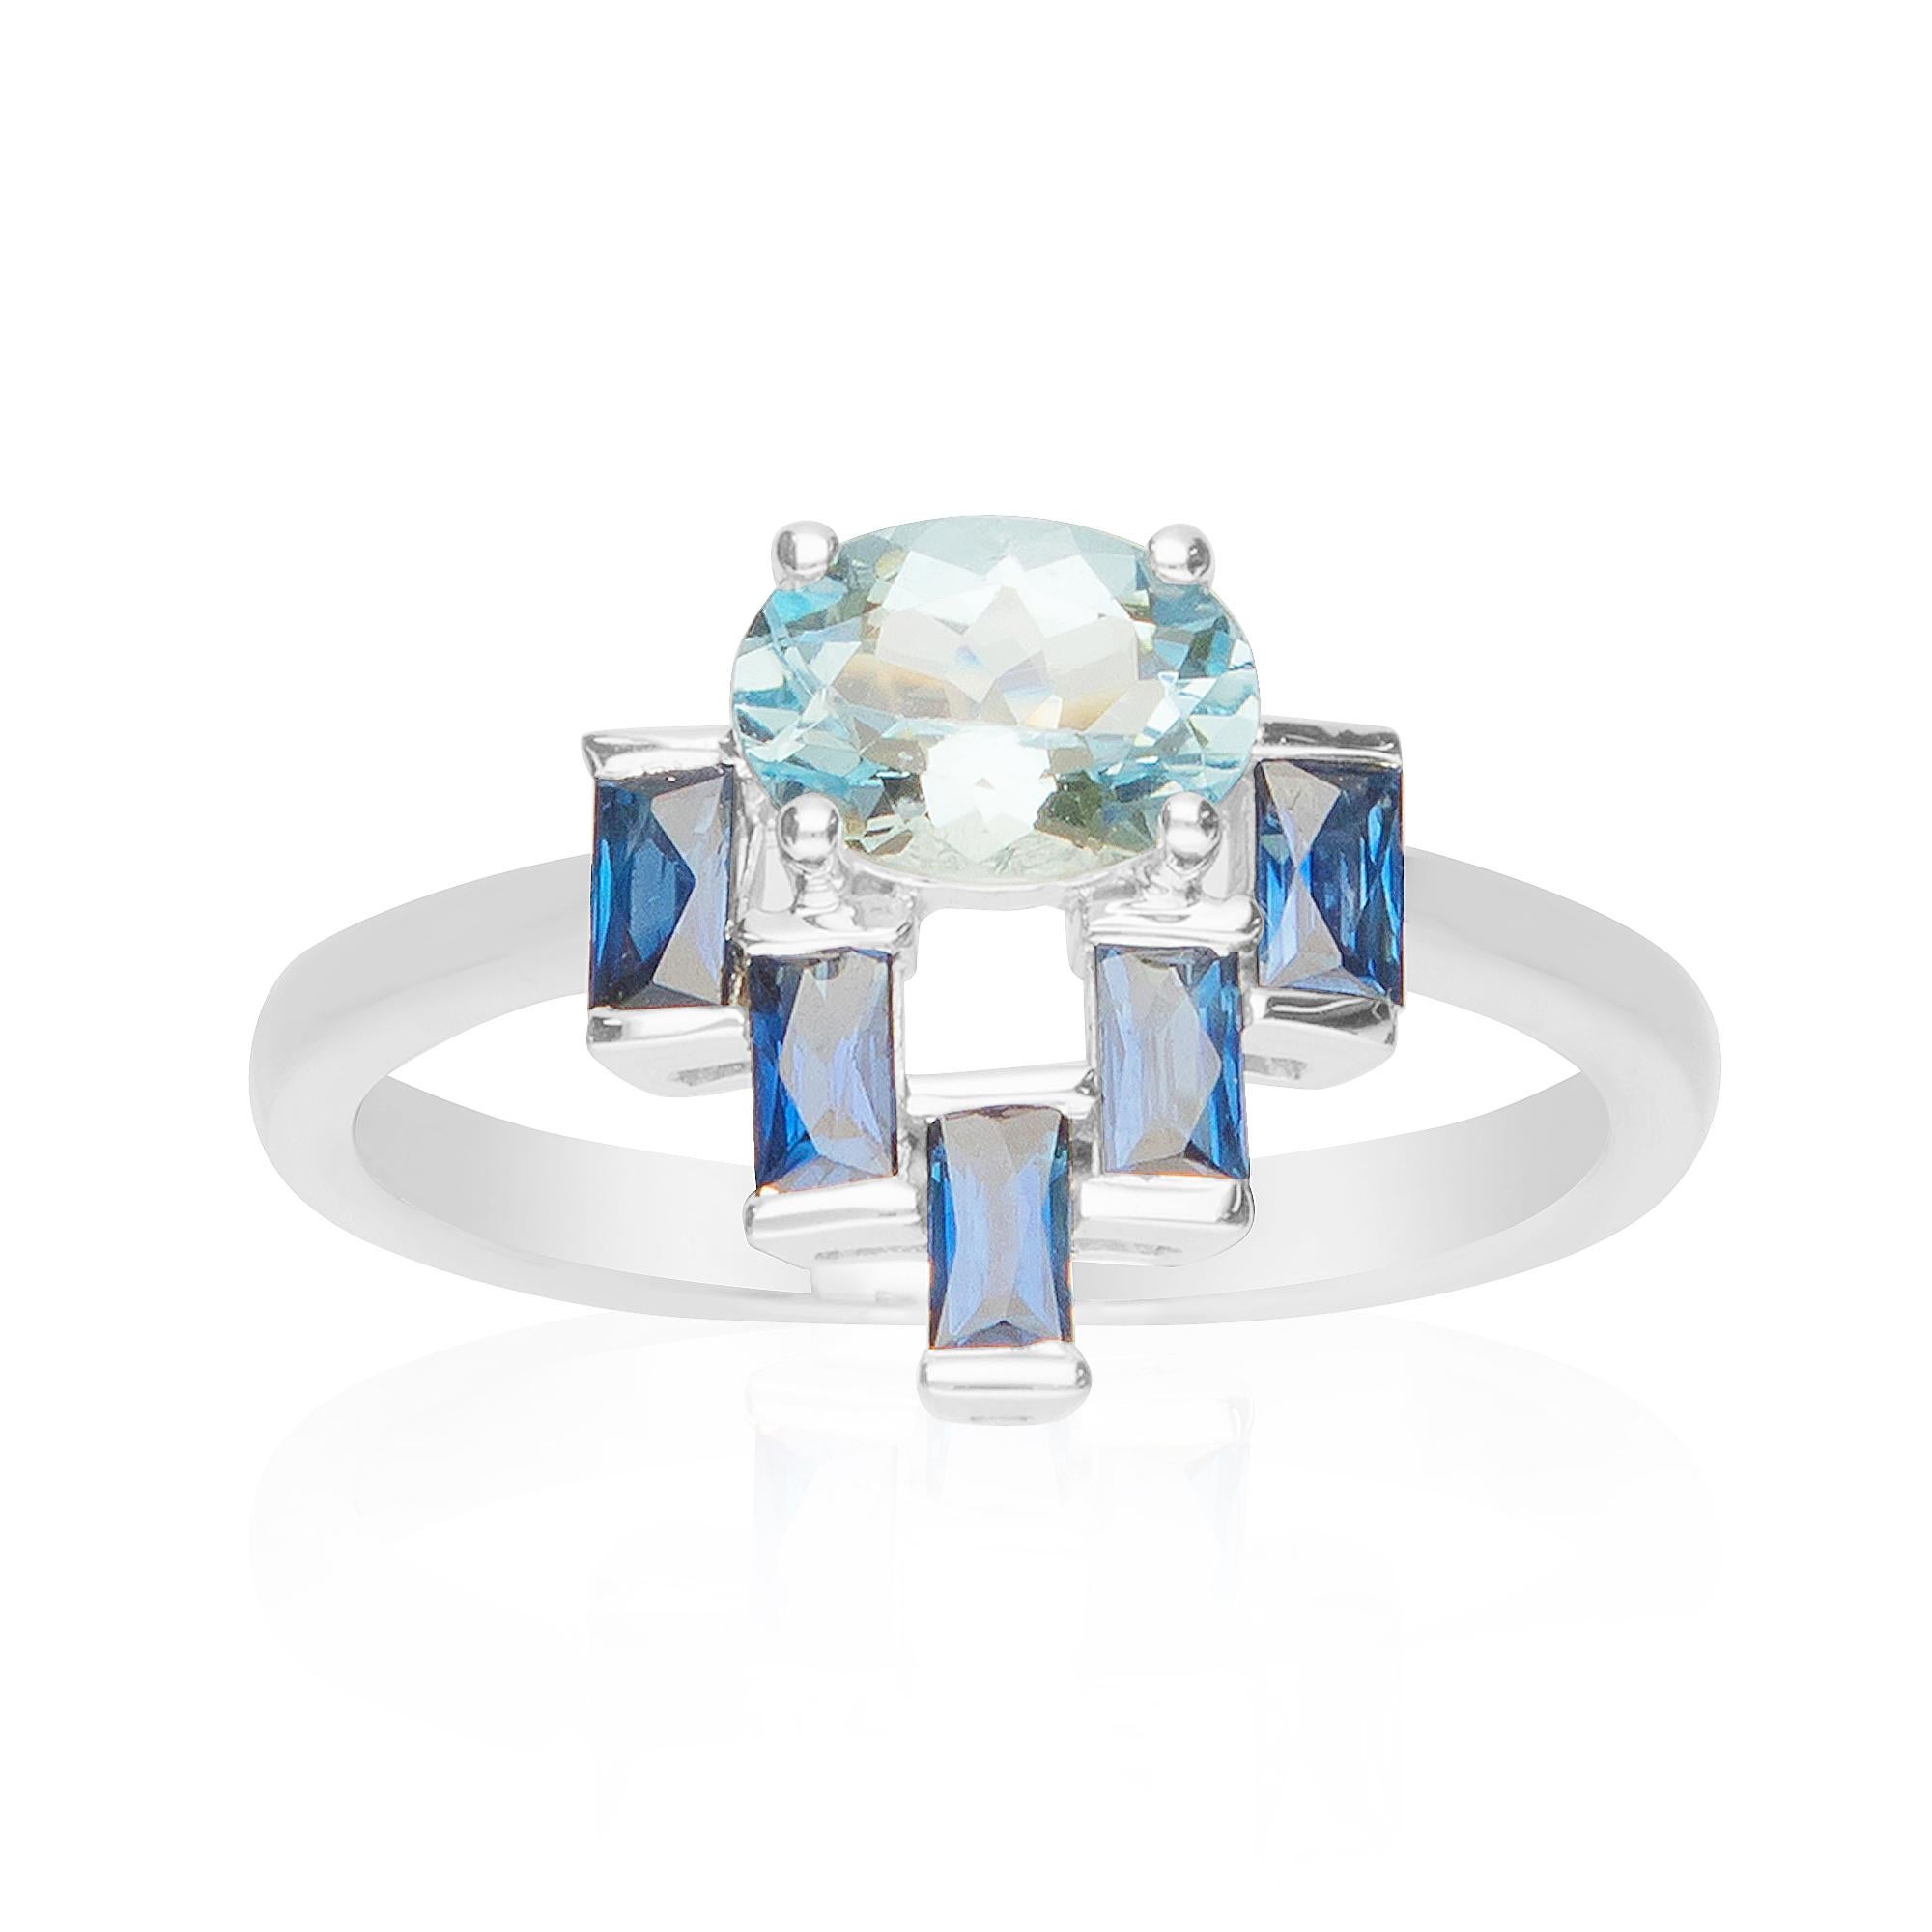 This unique designer ring is crafted in 18-karat White gold and features an oval cut 3/4 Carat Aquamarine and 5 Blue Sapphires 1/3 Ct. in a prong-setting. This ring comes in size 7 and is a perfect gift either for yourself or someone you love.